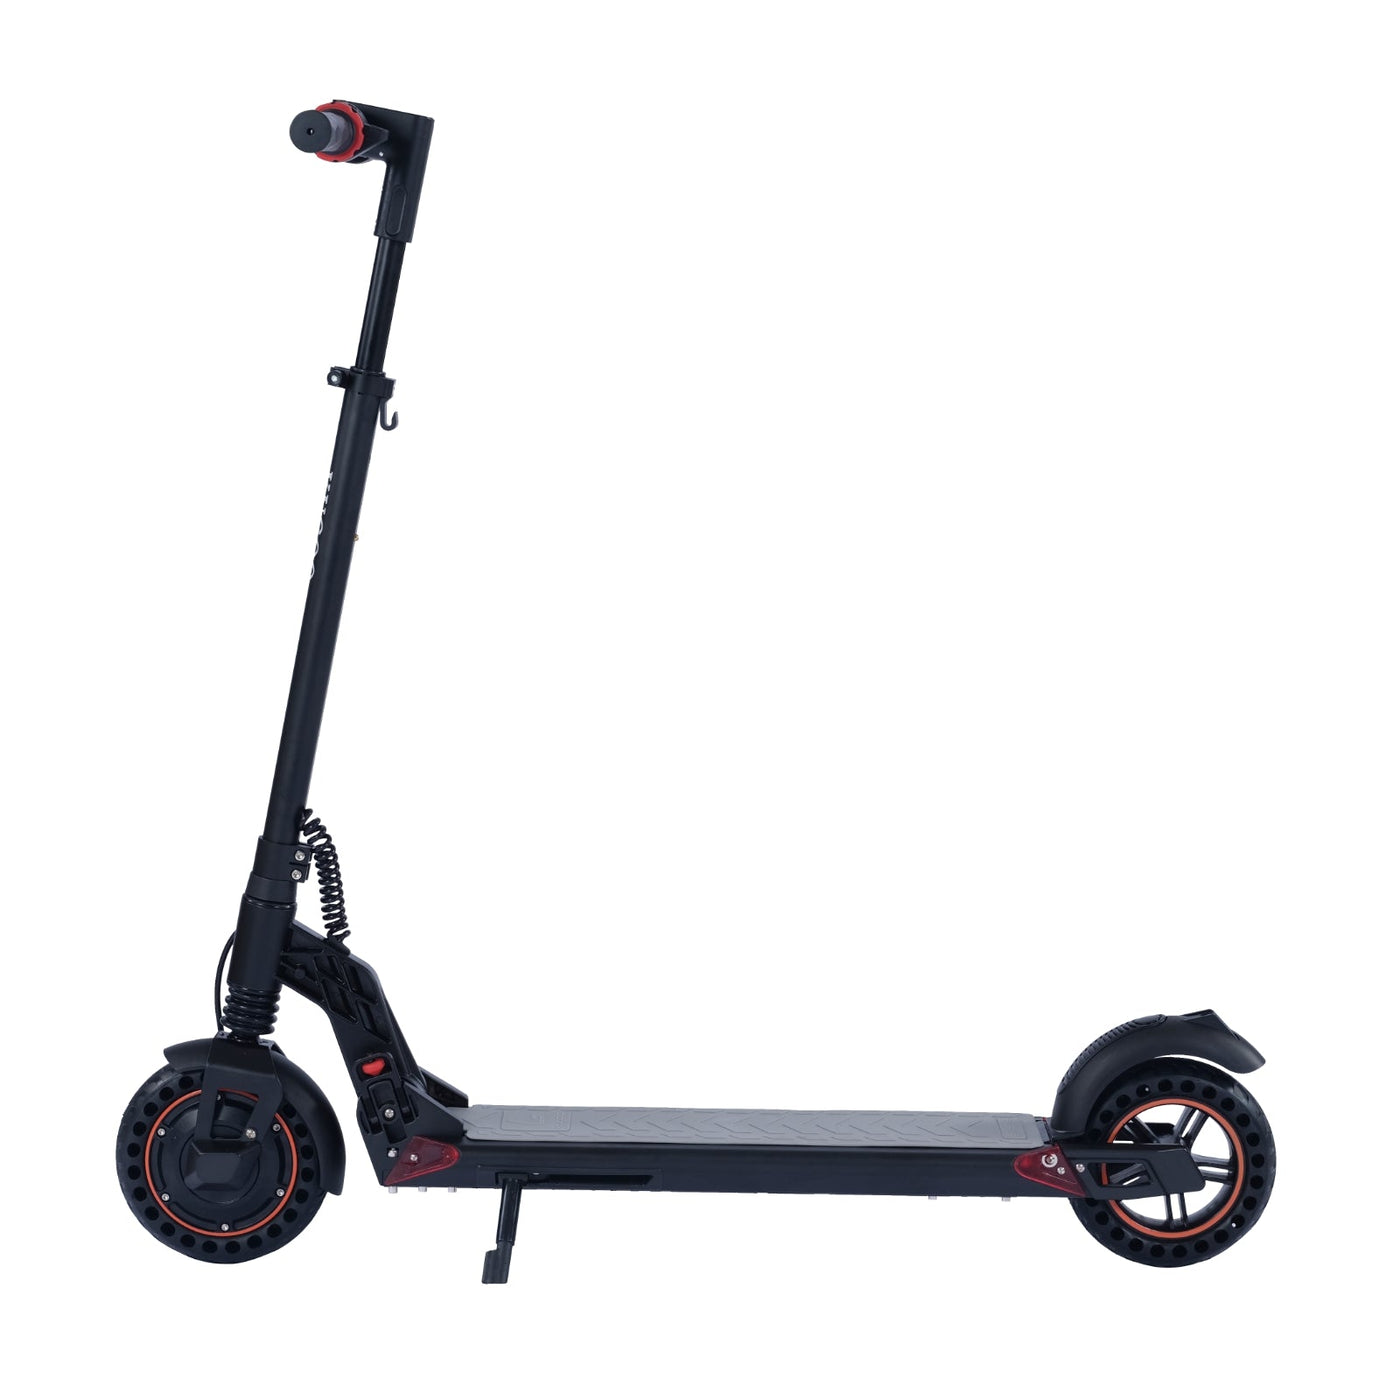 KUGOO S1 PLUS Commuting Electric Scooter